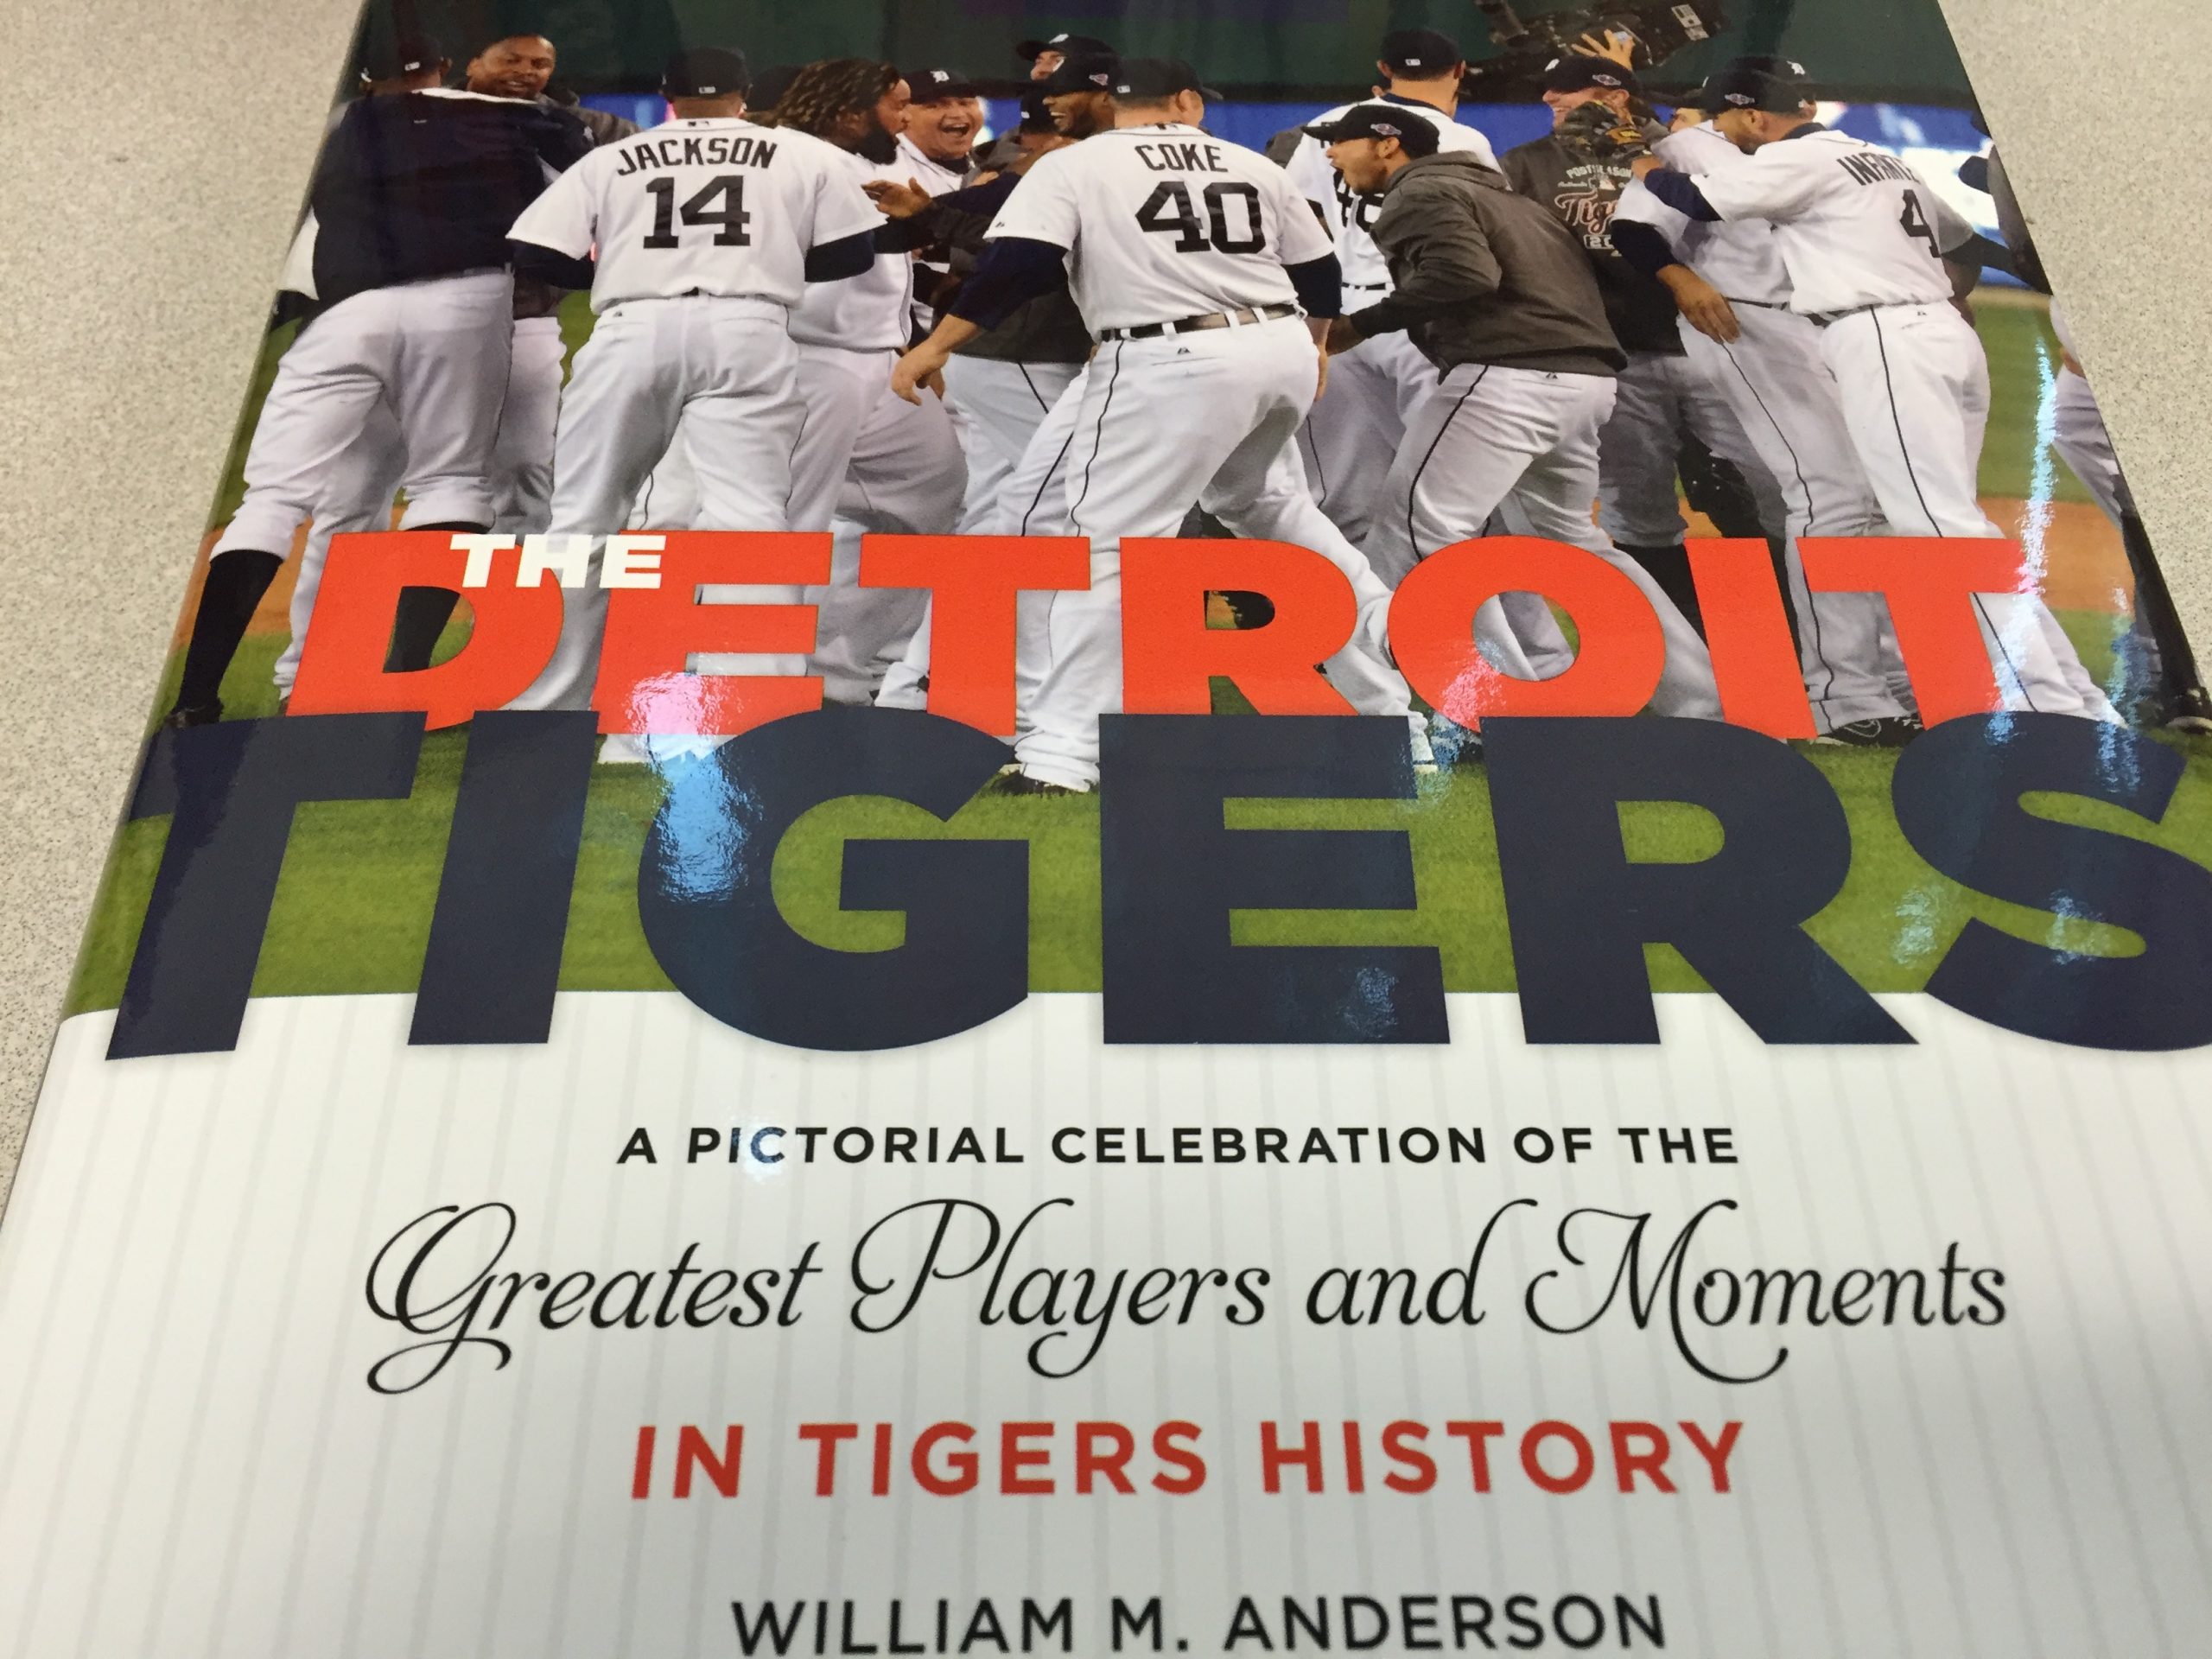 The Detroit Tigers: A Pictorial Celebration of the Greatest Players and Moments in Tigers History [Book]